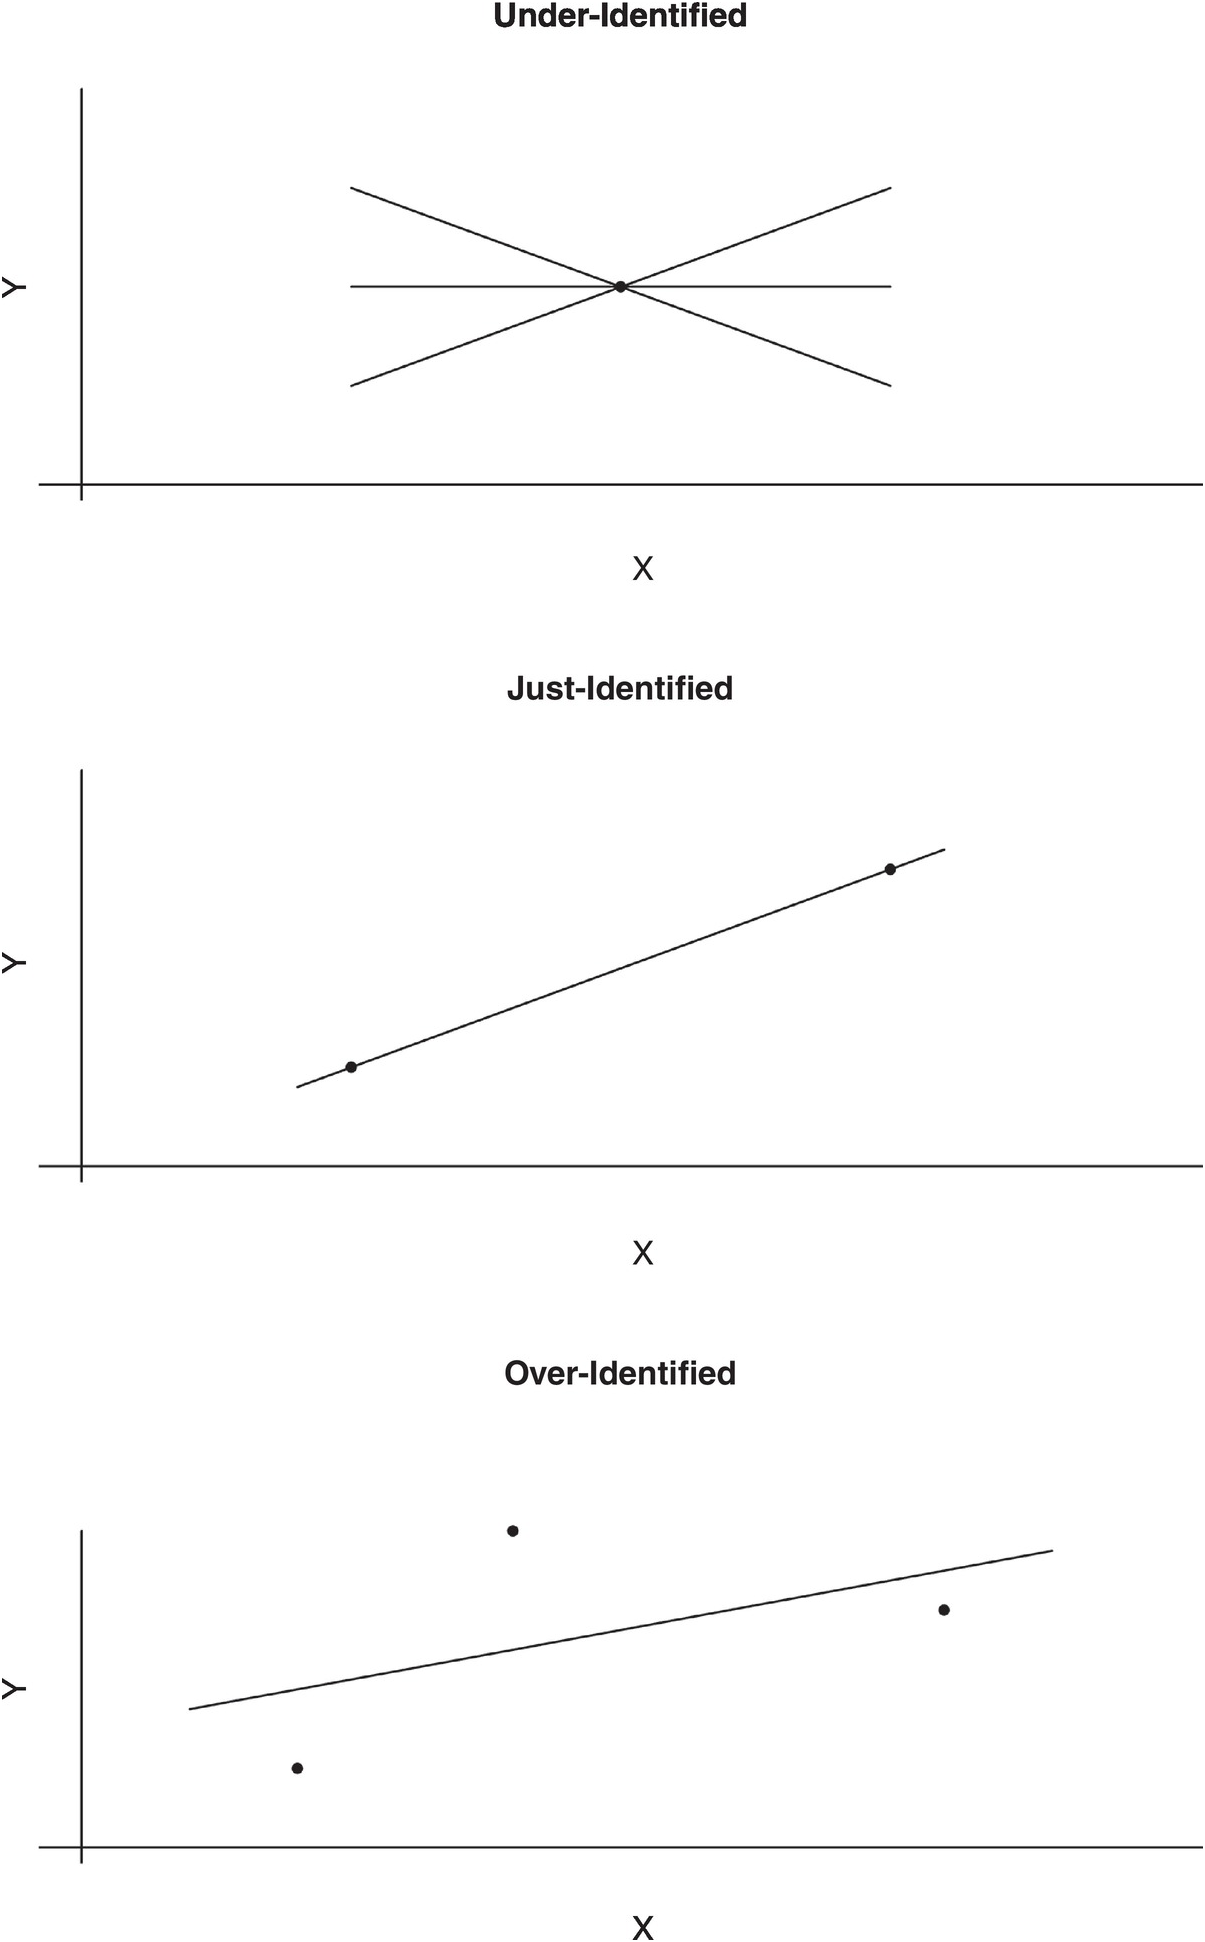 p value - Question about model fit indices in Confirmatory Factor Analysis  - Cross Validated